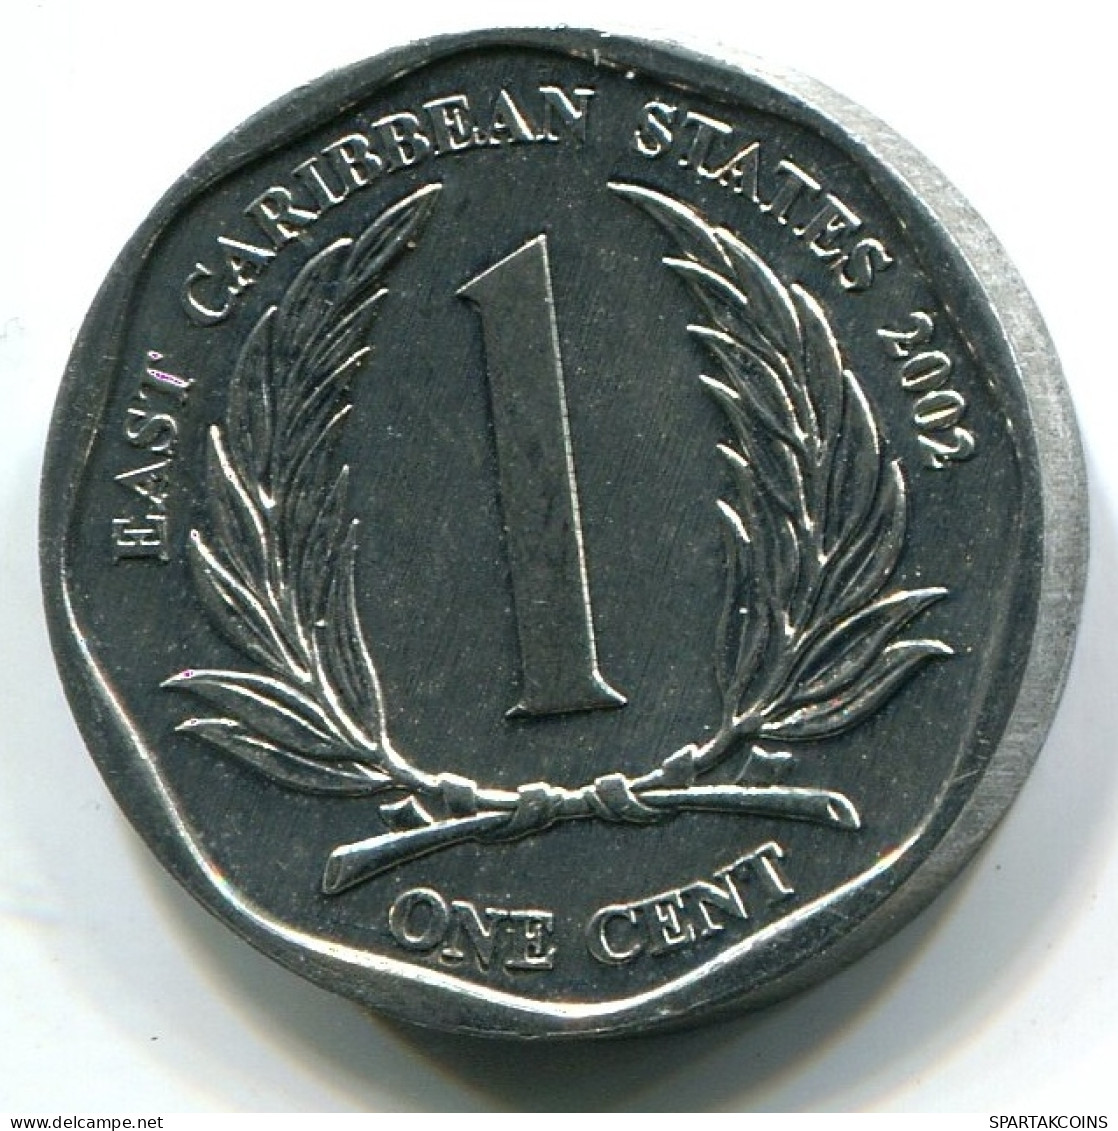 1 CENT 2002 EAST CARIBBEAN UNC Coin #W10907.U - East Caribbean States